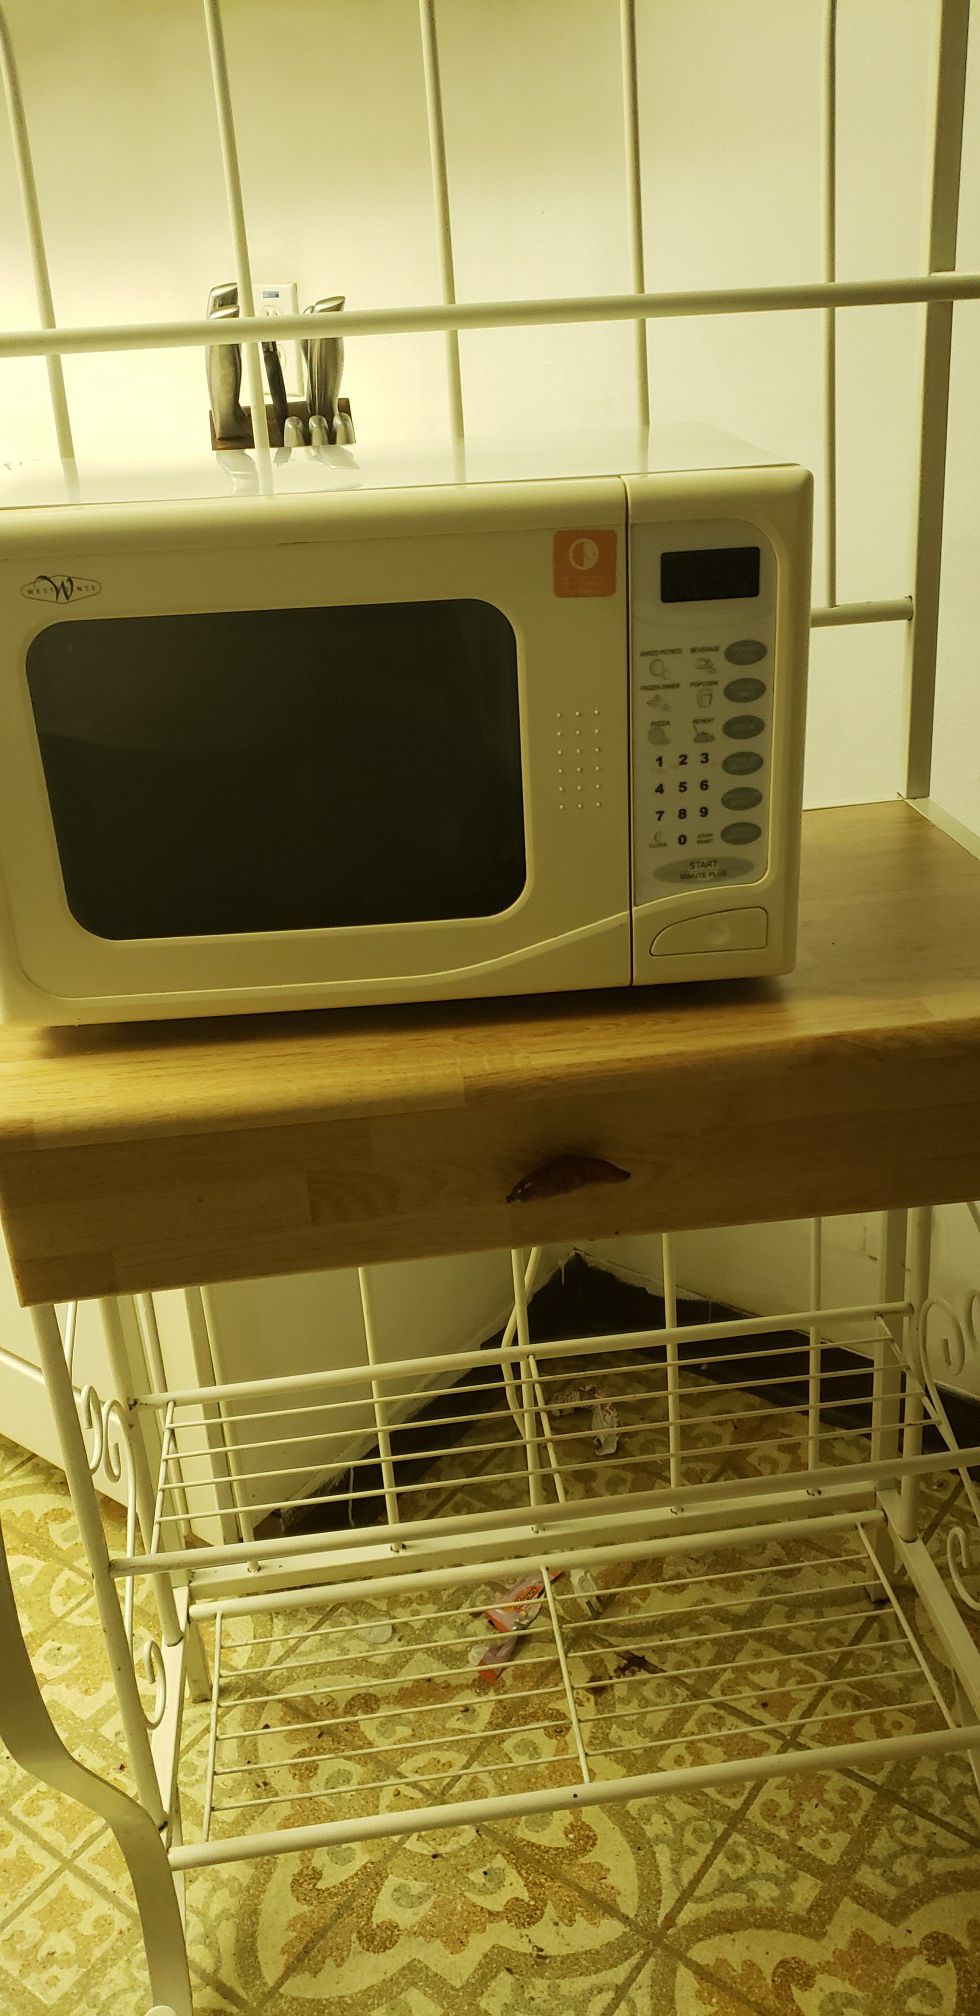 Baker Rack Off white with drawer! $50.00 or offers